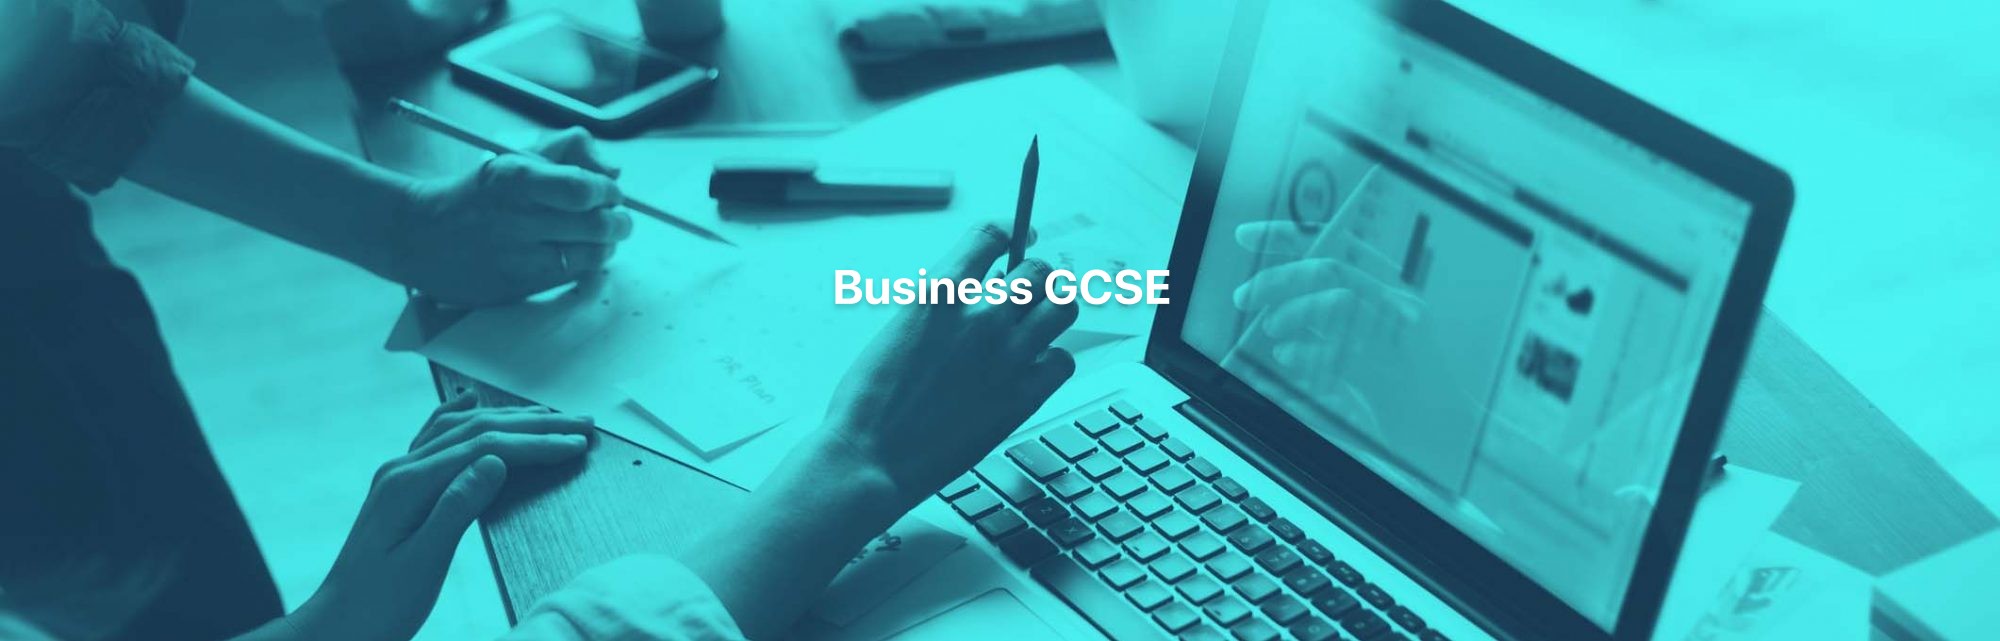 Business GCSE Distance Learning Course by Oxbridge